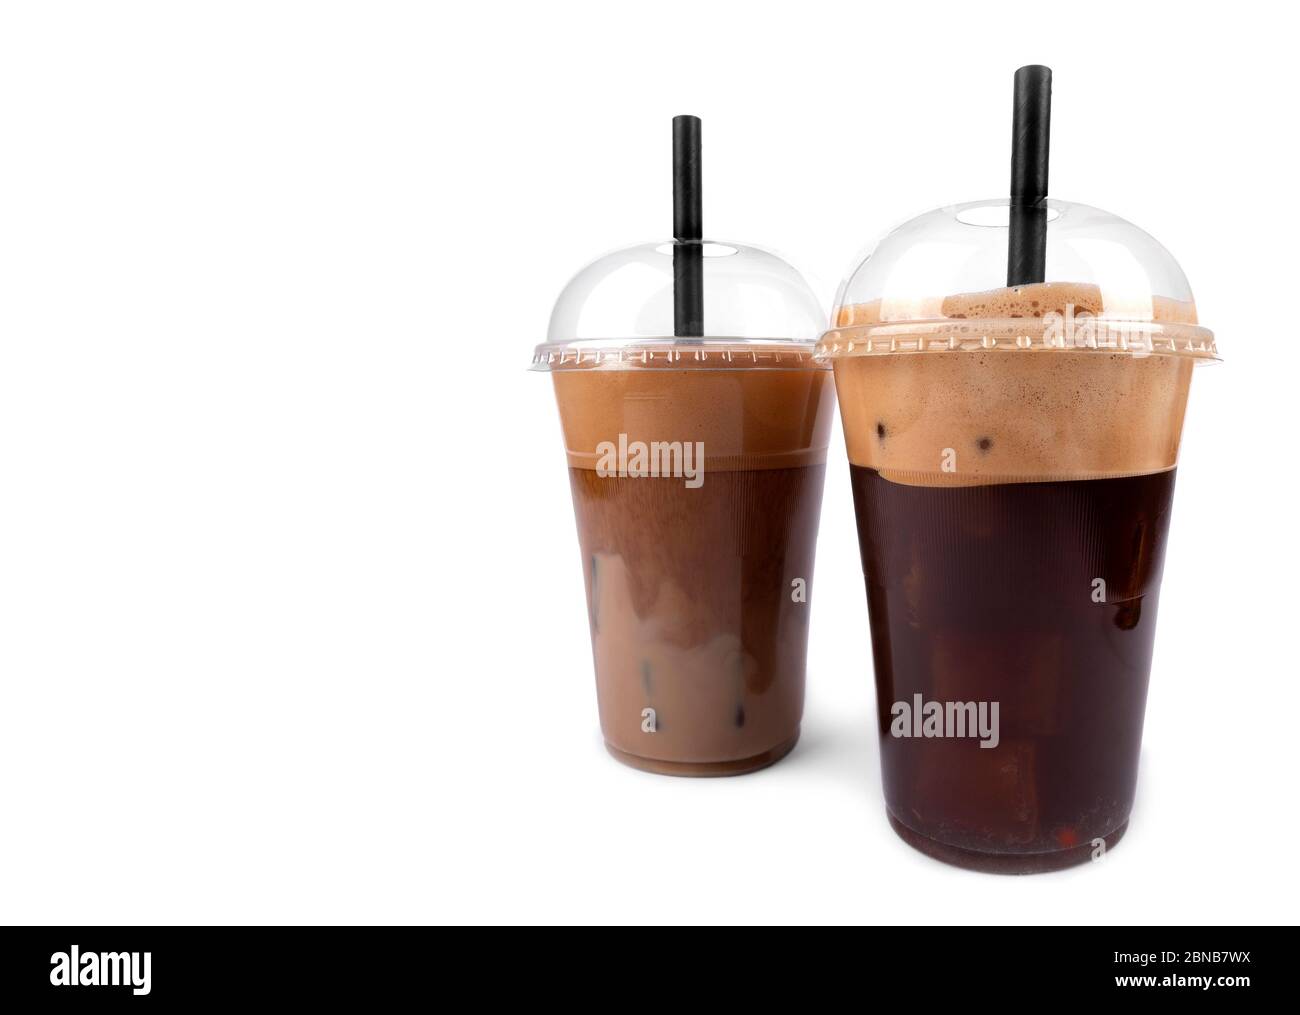 Frappe coffee with straw in plastic takeaway cup isolated on white background Stock Photo